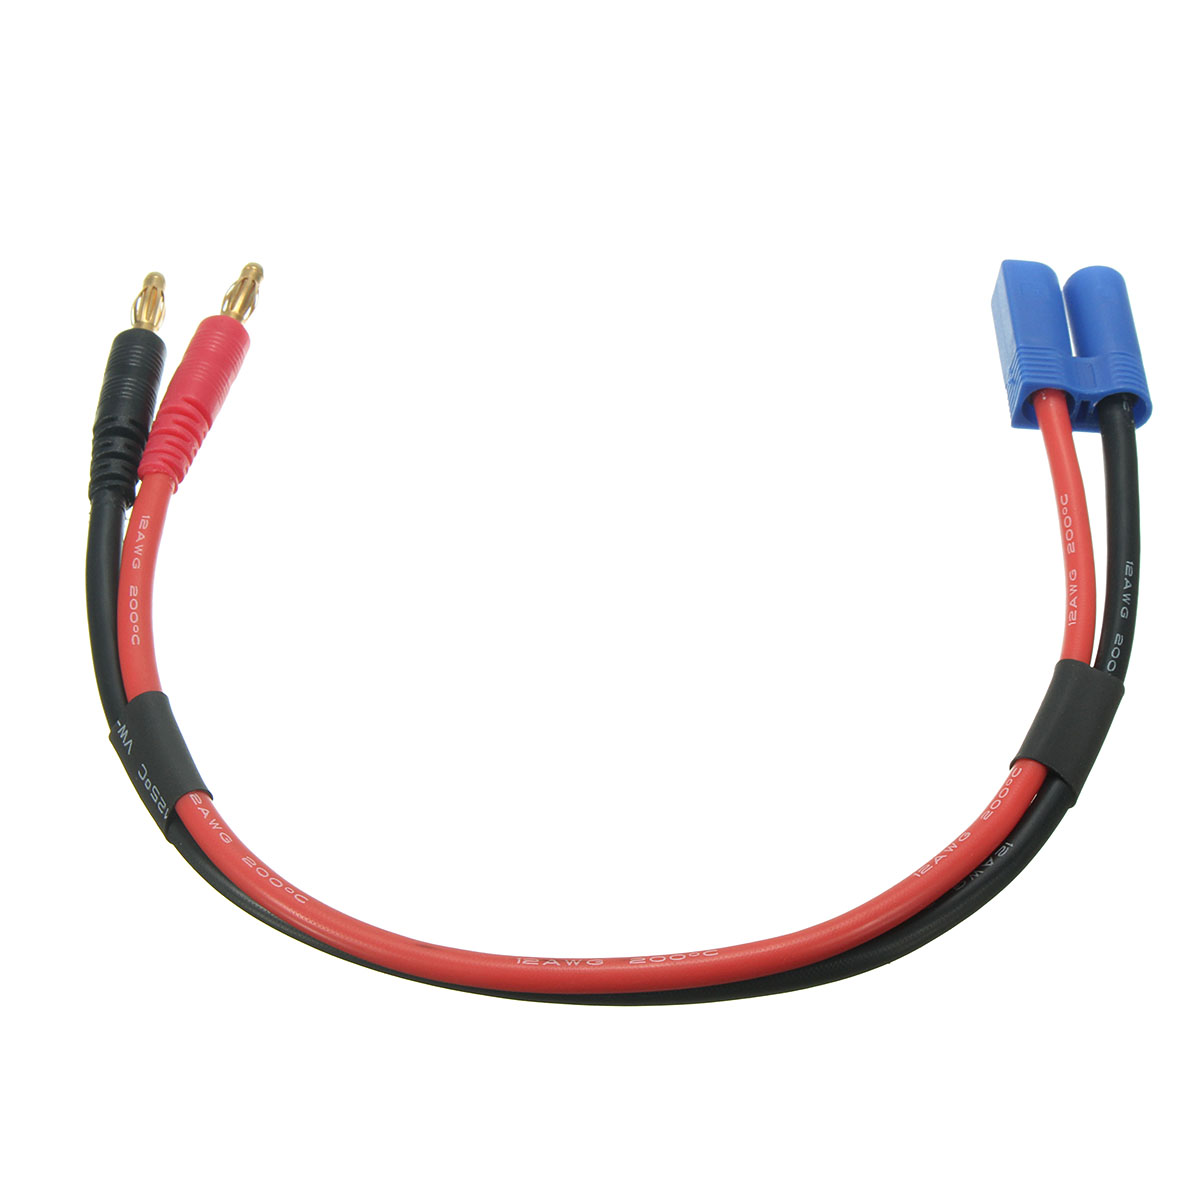 4mm-Banana-EC5-Plug-Charging-Cable-Lithium-Battery-Charging-Wire-1144660-3